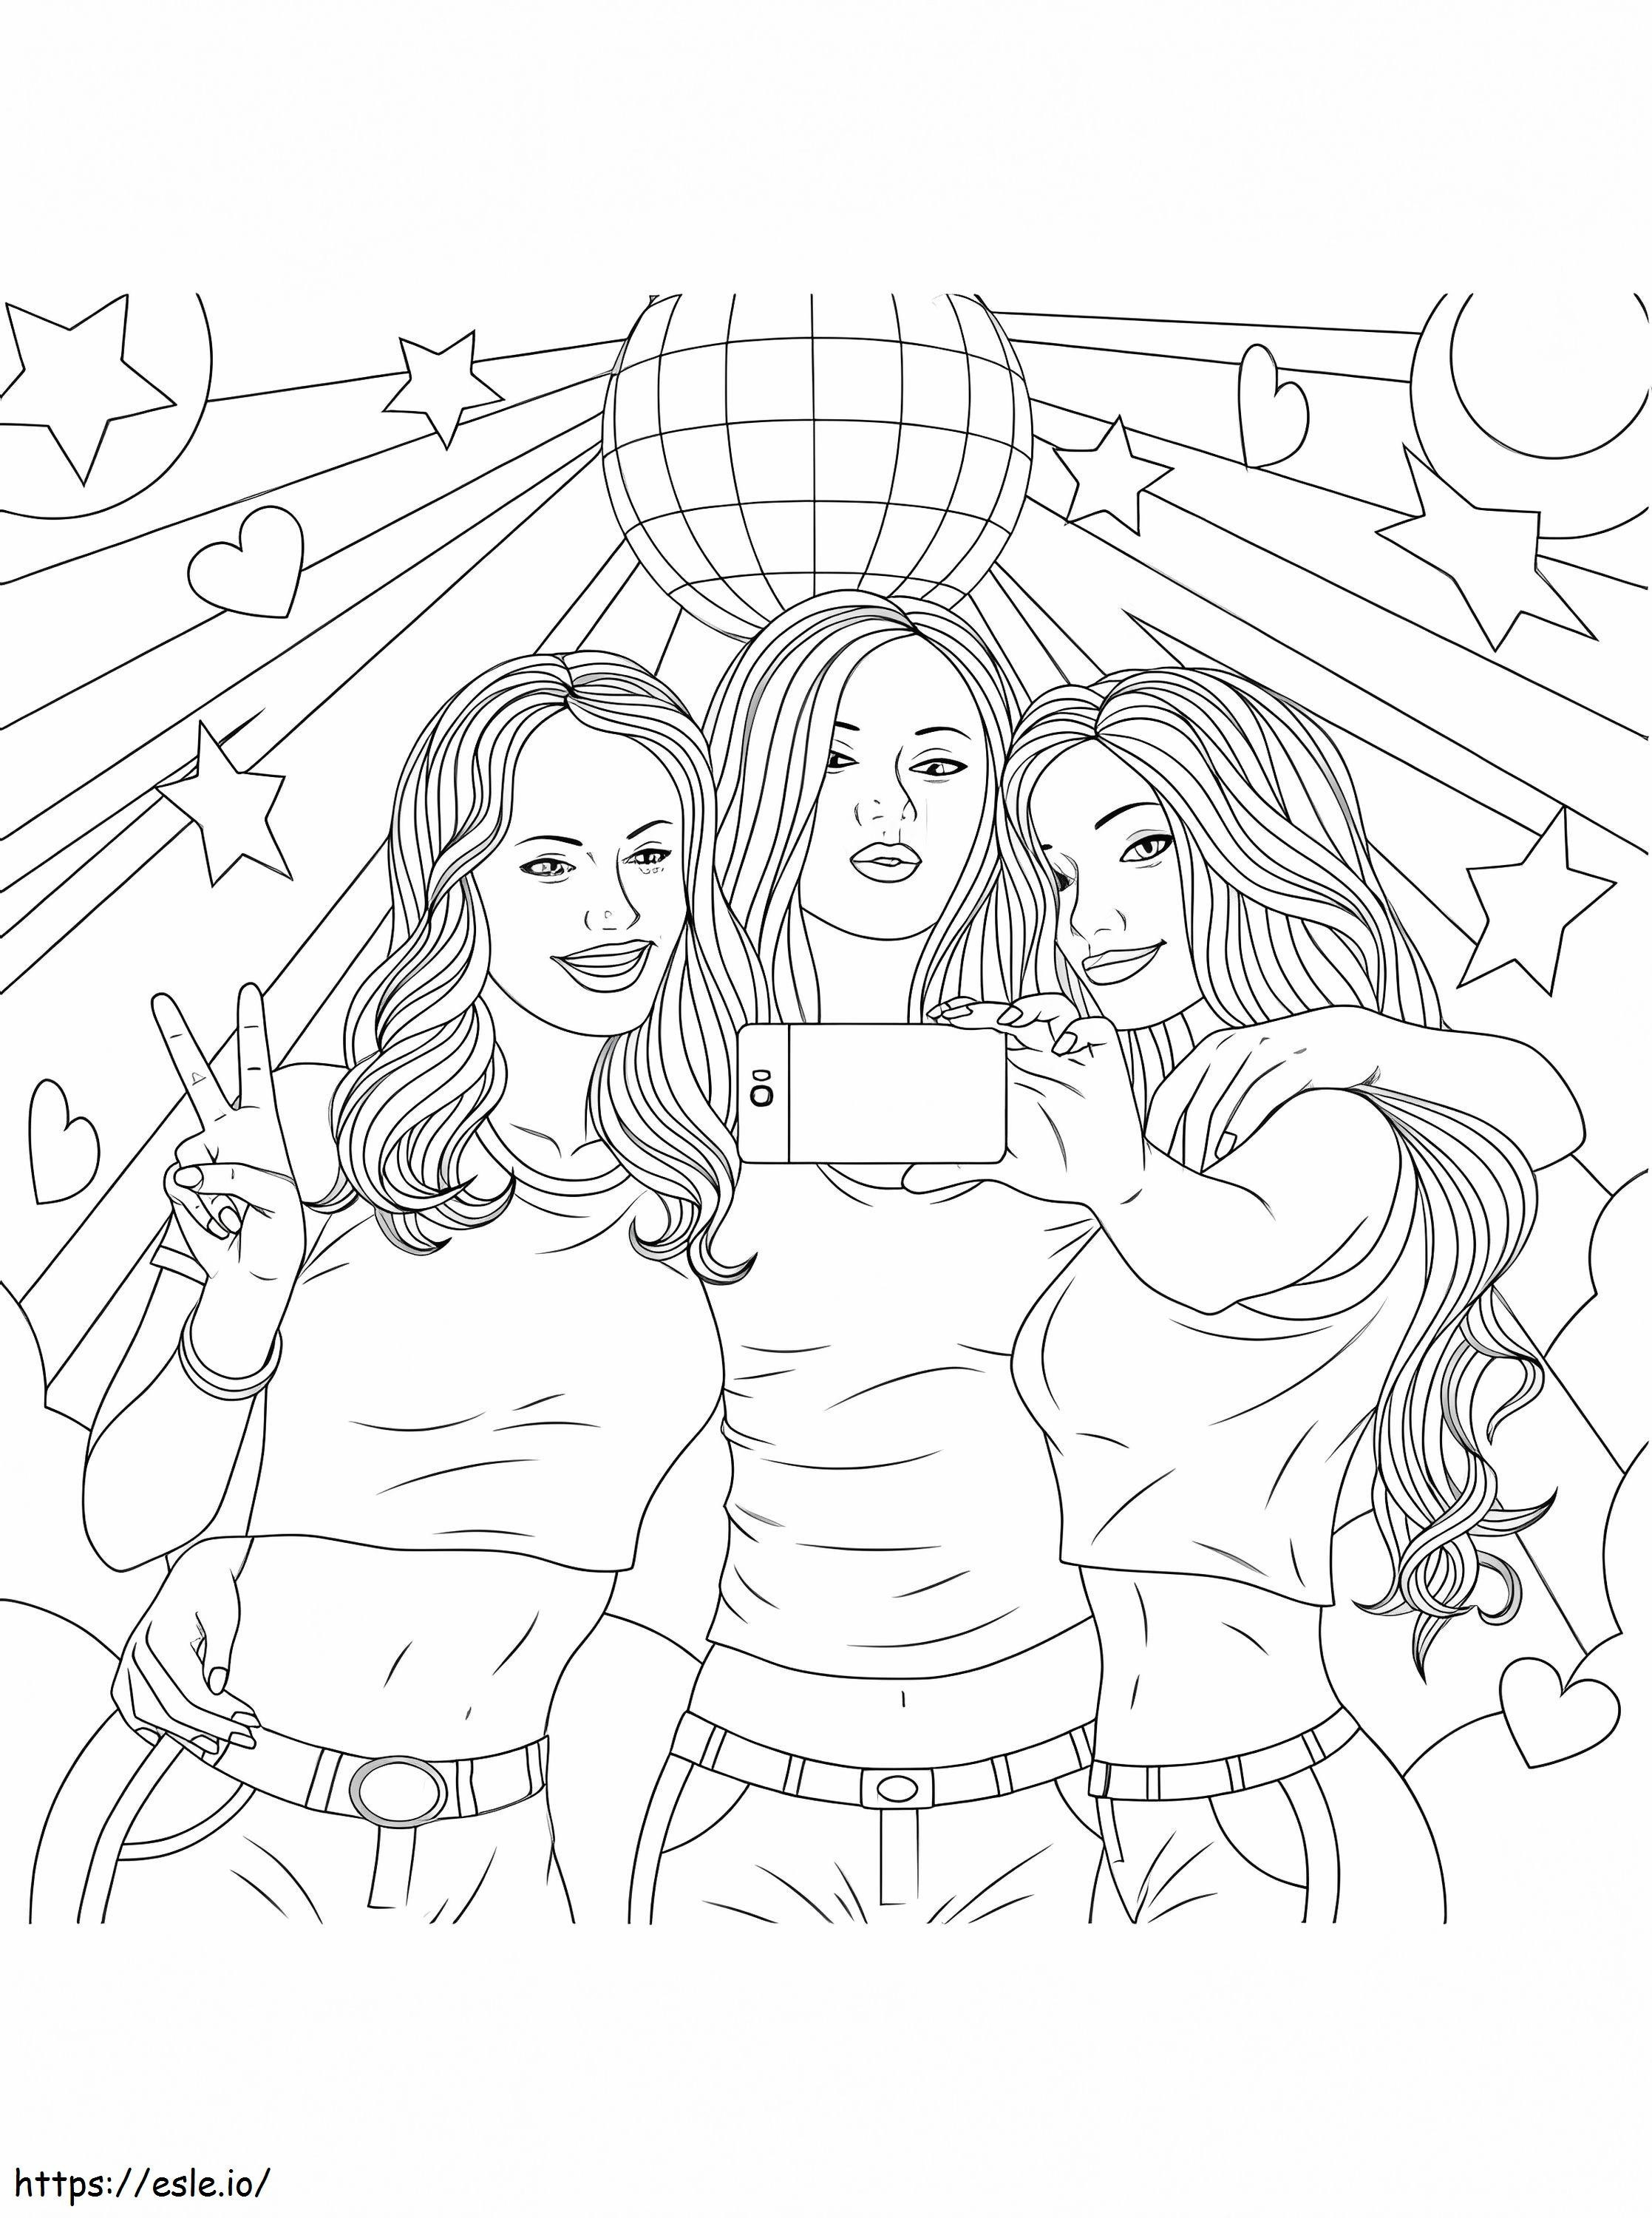 Teenagers Best Friends coloring page